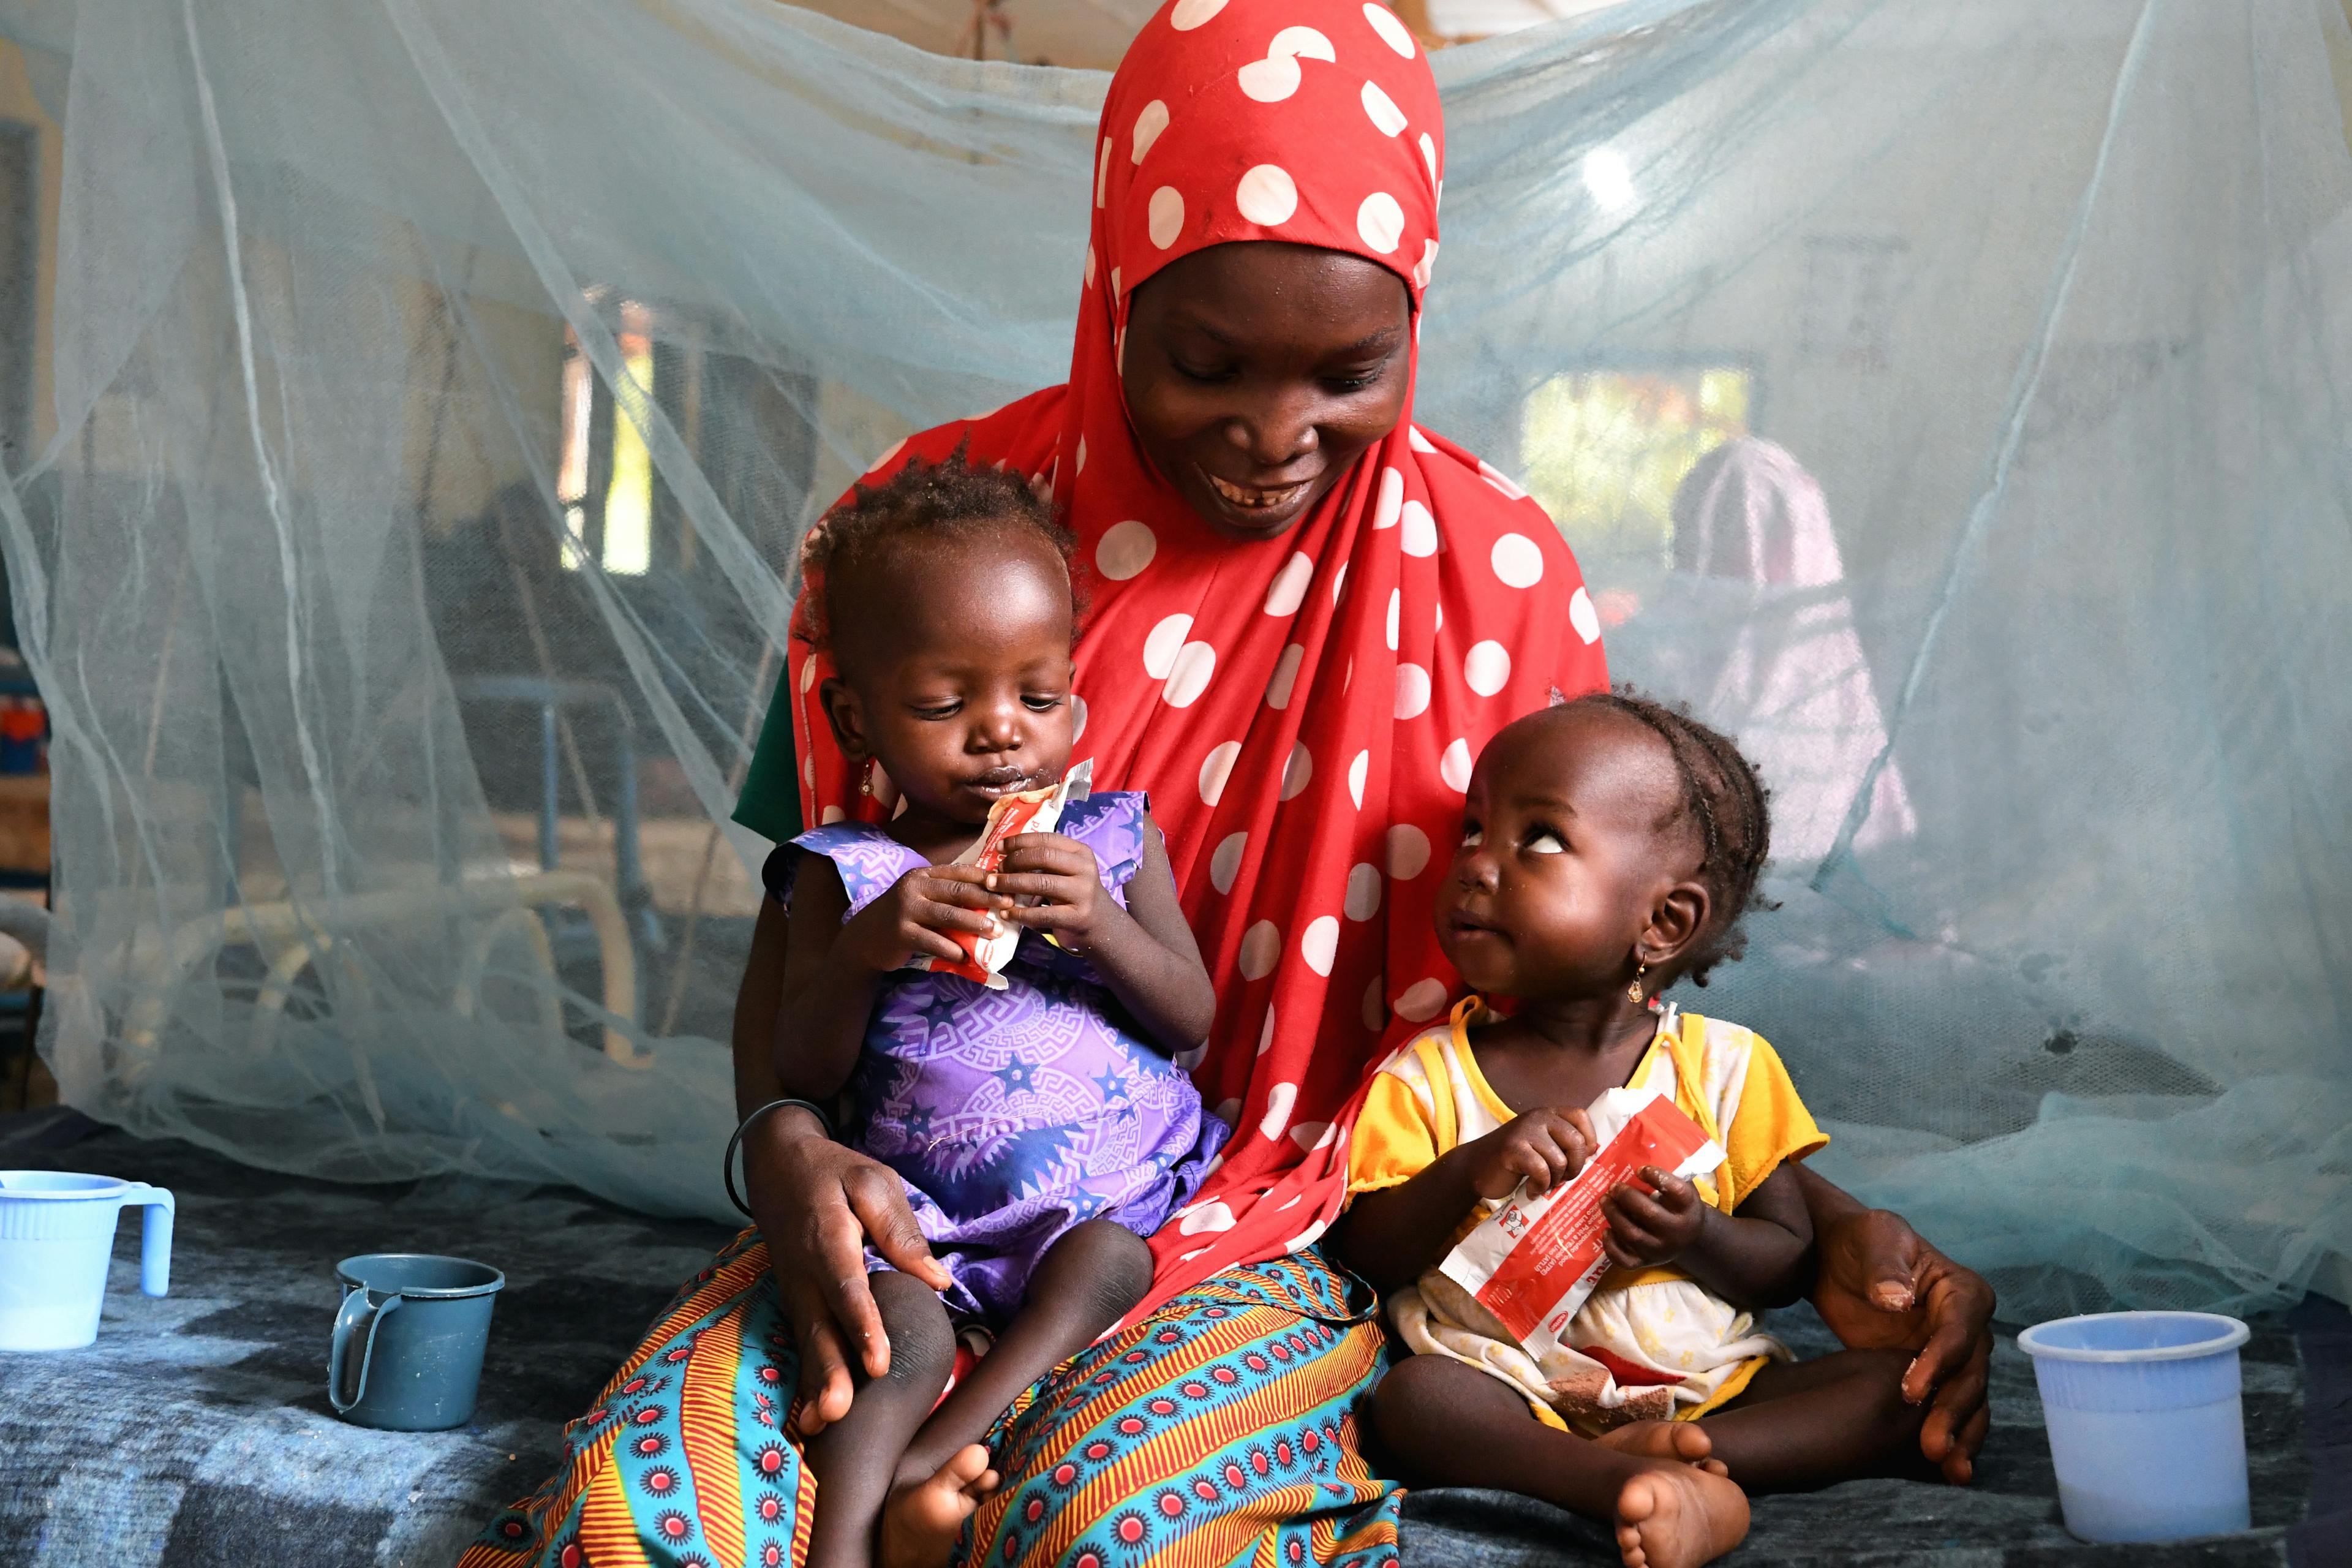 On 9 October 2021 in Niger, Nana Hadiza, 28, holds her twin daughters as they sit on a hospital bed at the CHU Hospital of Maradi. The twins are treated for malnutrition with Ready-to-Use Therapeutic Foods (RUTF) like Plumpy'Nut and H100 supplements.